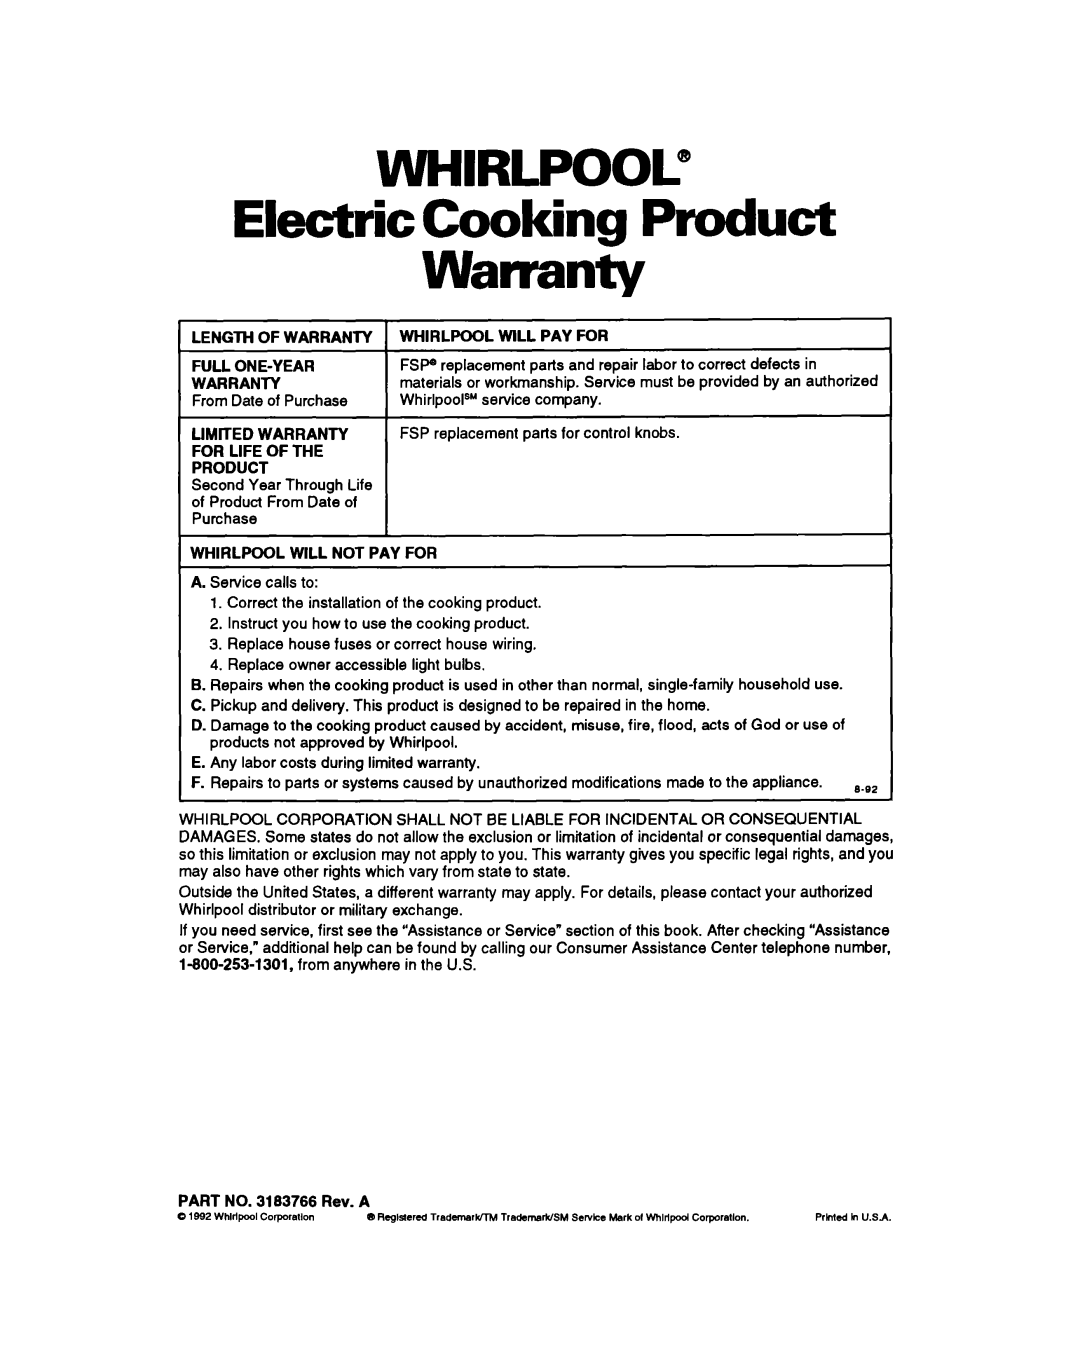 Whirlpool RS630PXY, RS6305XY warranty WHIRLPOOL@ Electric Cooking Product, Warranty 